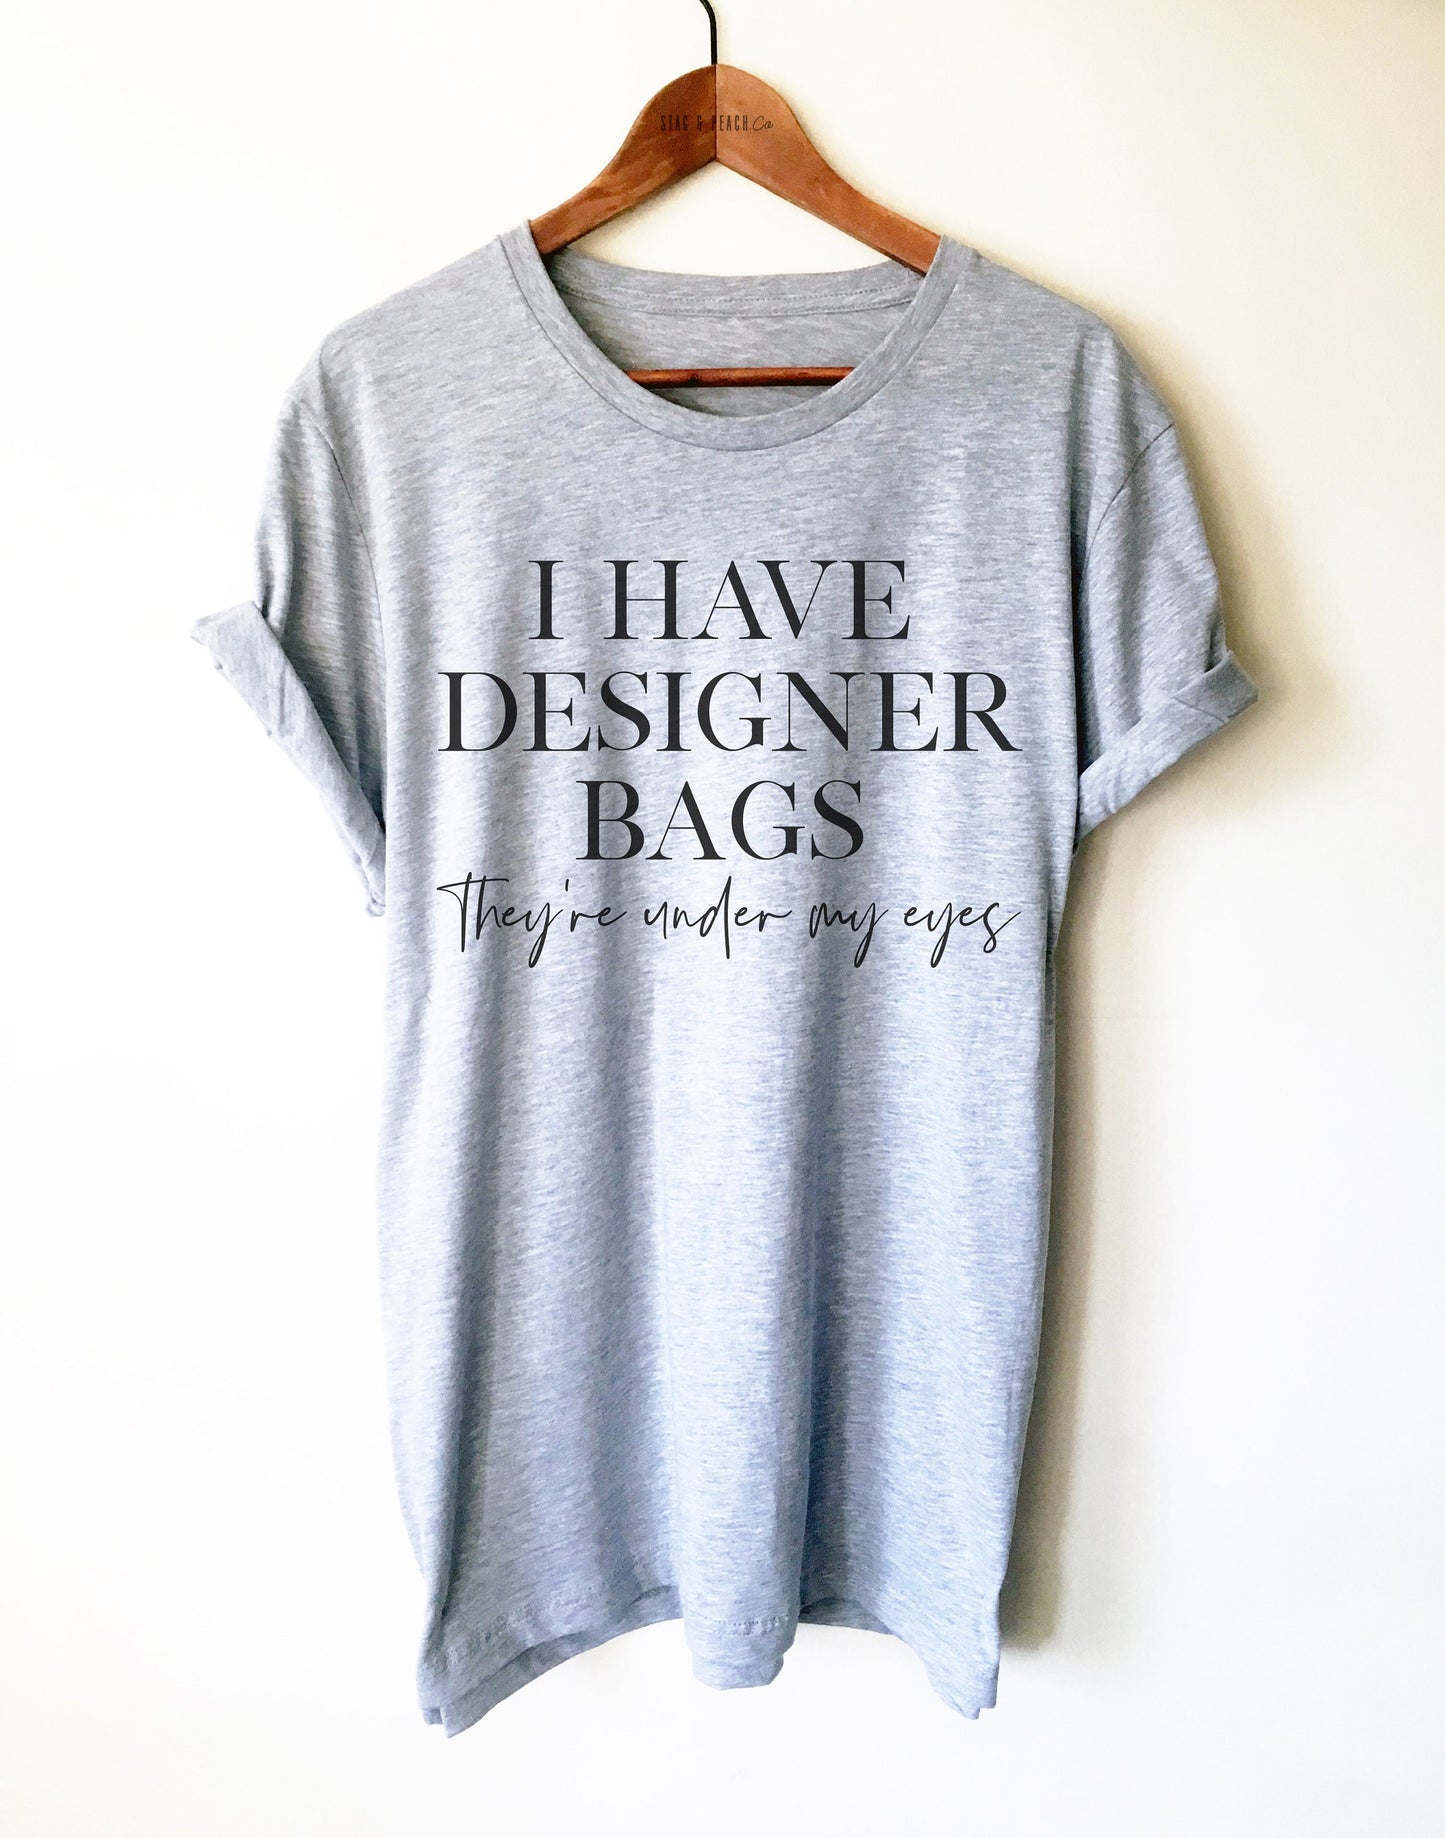 Designer Bags Under My Eyes Unisex Shirt -Exhausted Shirt, Gift For Mom, Funny Mothers Day Shirt, New Mom Shirt, I Need Sleep Tee, Girl Boss